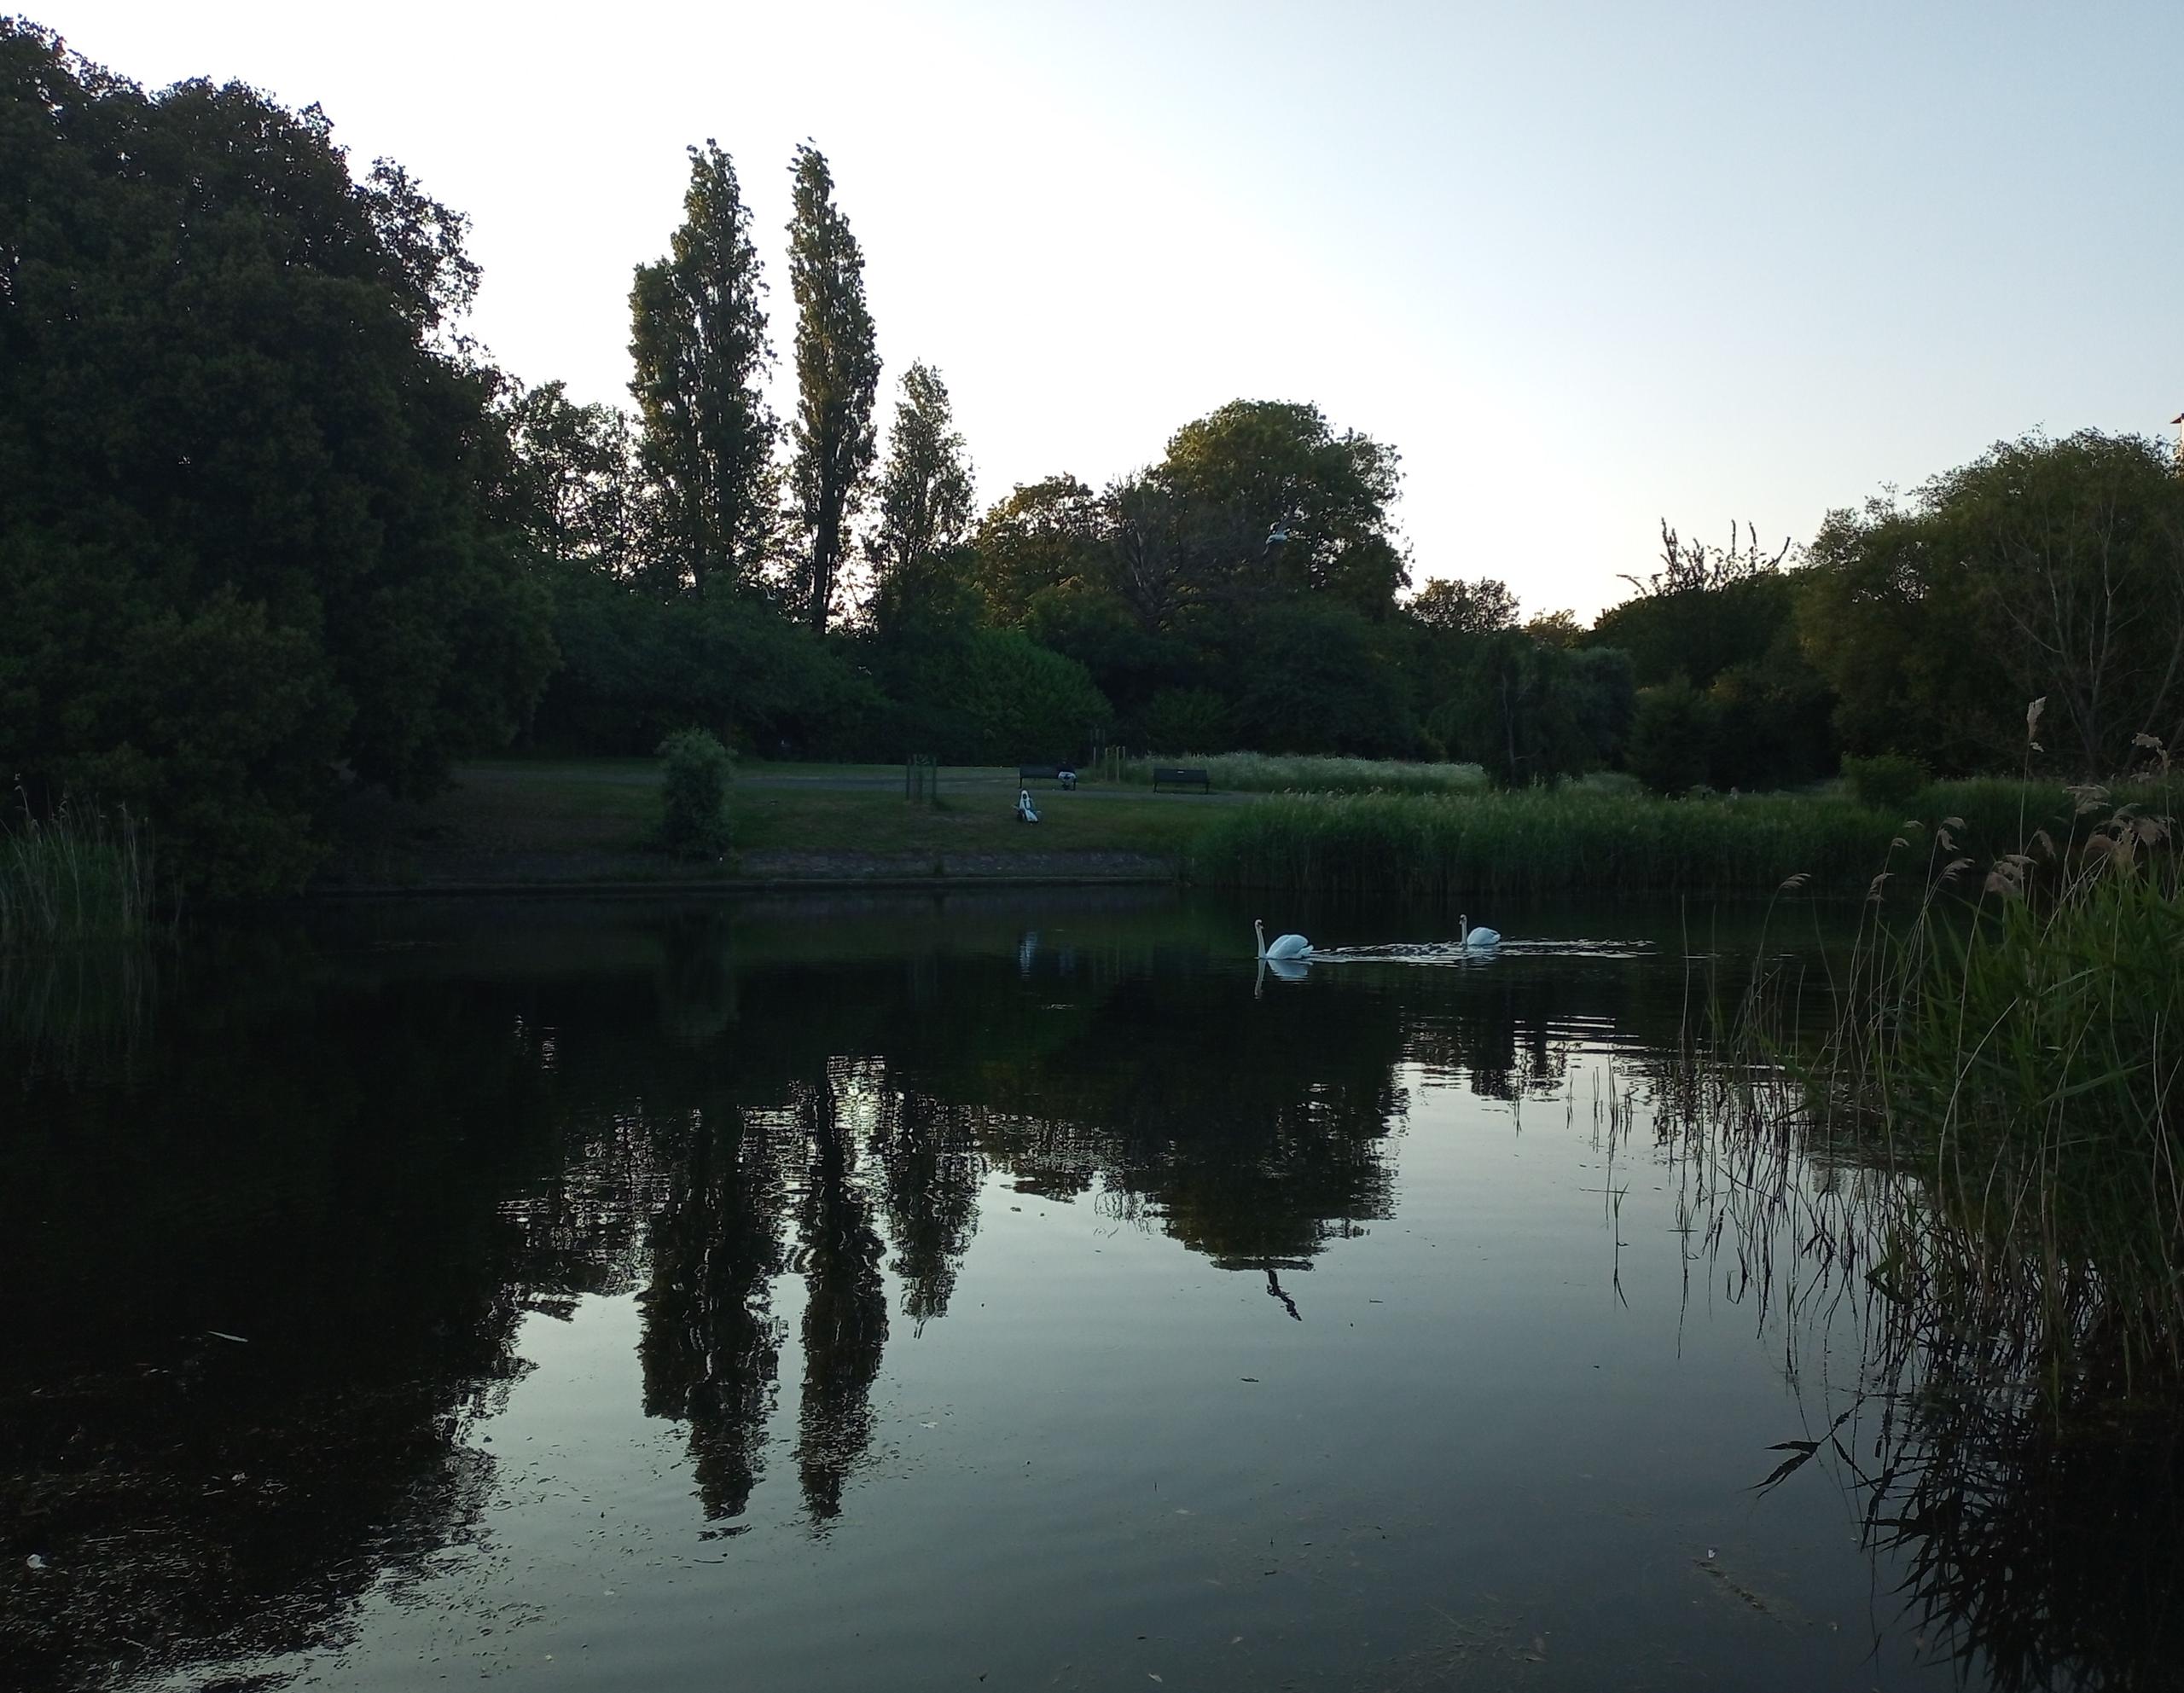 Swans and cygnets in the evening light